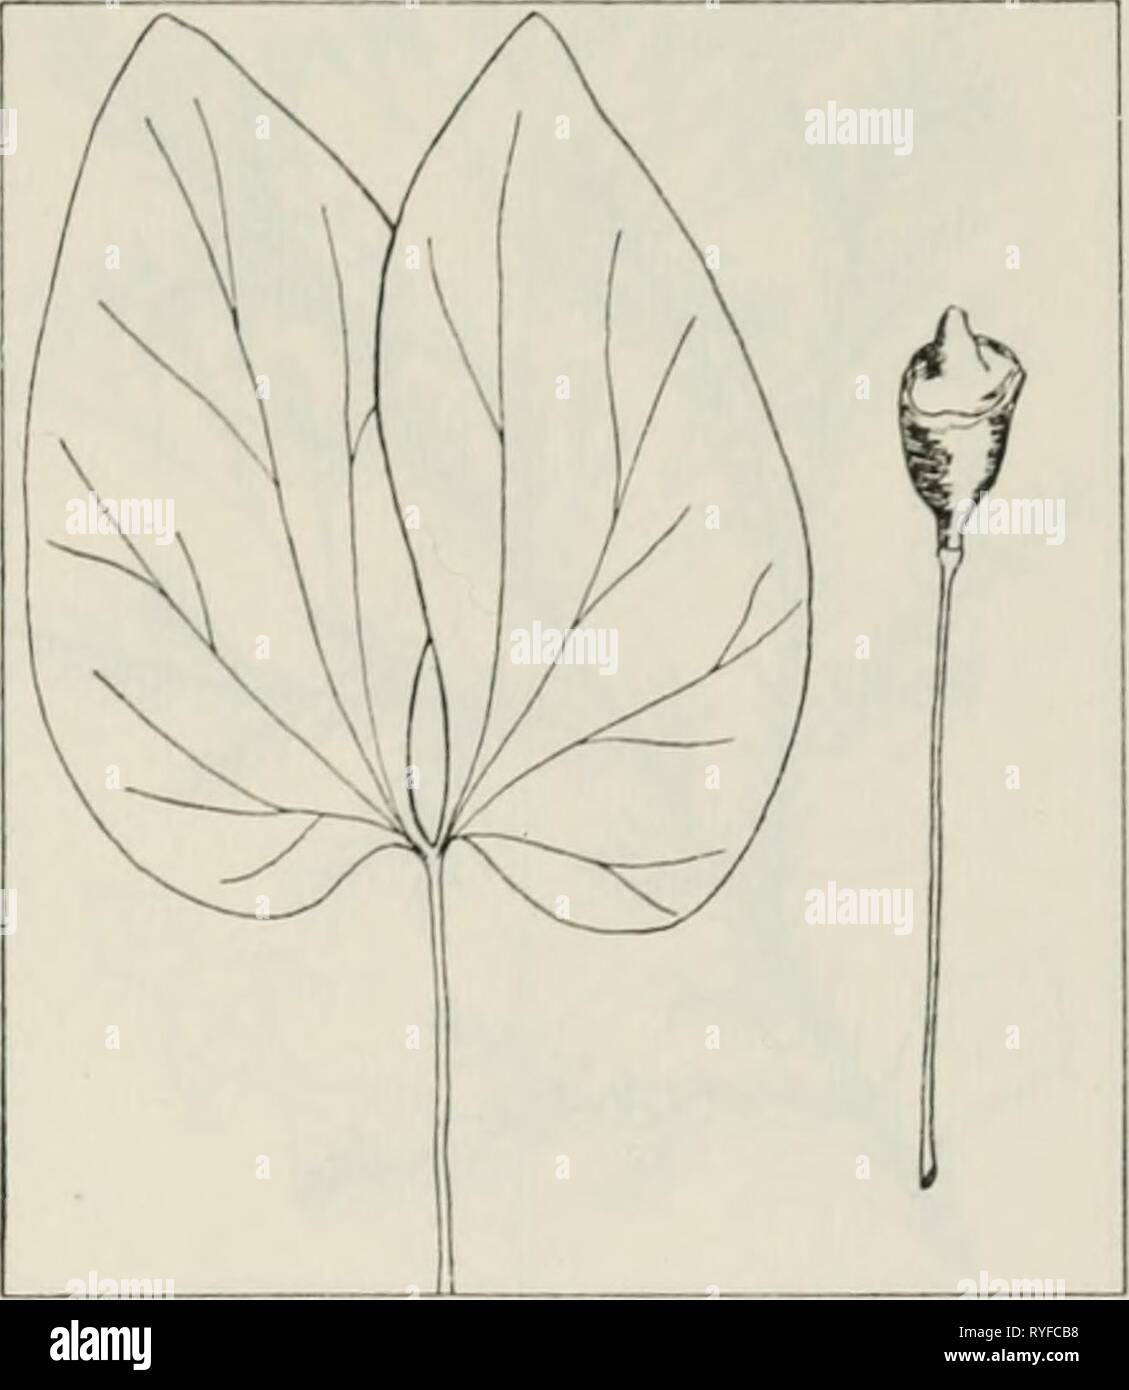 The drug plants of Illinois  drugplantsofilli44teho Year: 1951  Tehon THE DRUG PLANTS OF ILLINOIS 69 JEFFERSONIA DIPHYLLA (L.) Pers. Twinleaf, rheumatism root, hel- met pod, yellow-root. Berberidaceae.— A stemless, smooth herb 6 to 18 inches tall, perennial; rootstock horizontal, somewhat fleshy, thick, knotty, yellow-brown, with numerous matted, fibrous roots; leaves arising directly from the rootstock, long- petioled, 3 to 6 inches long, glaucous be- neath, divided into 2 broad, somewhat semicircular, sometimes lobed parts; flowers white, about 1 inch wide, solitary at the ends of flowering  Stock Photo